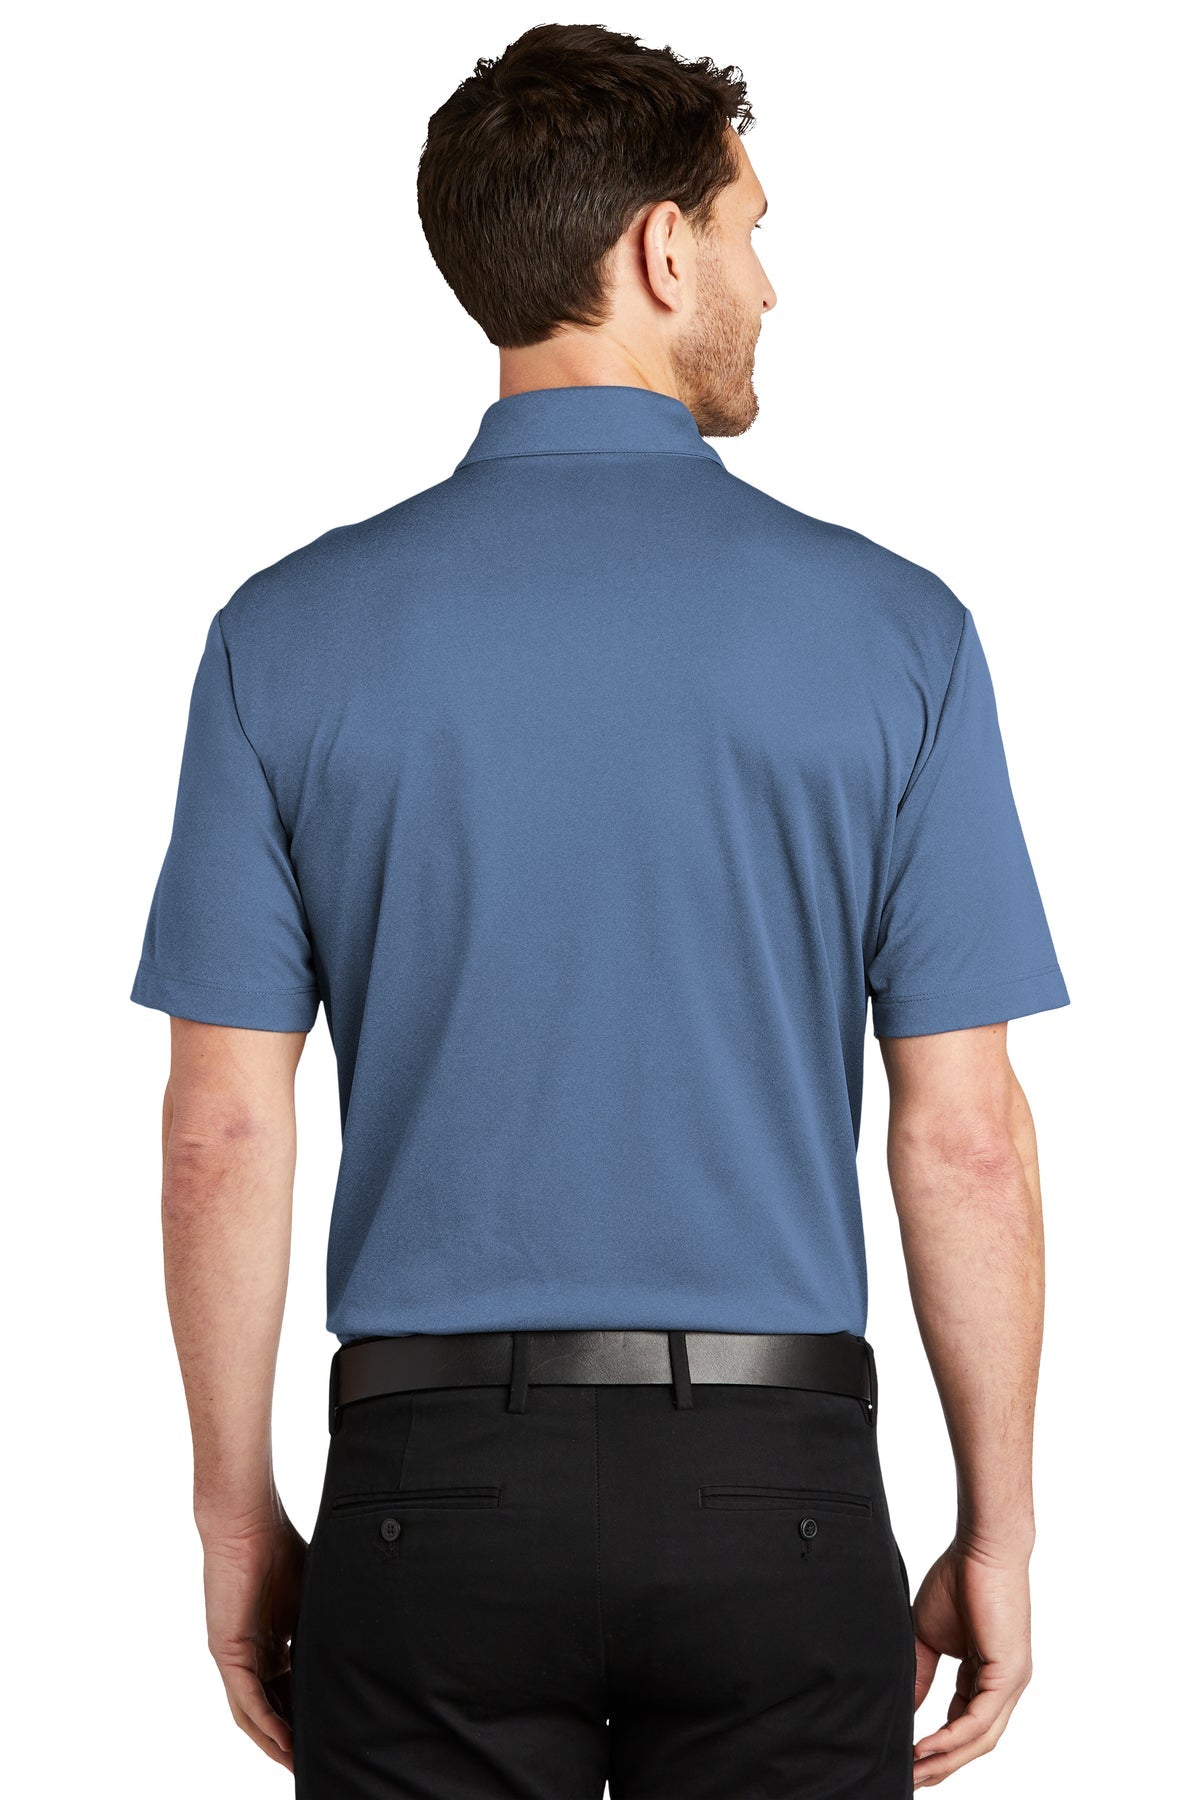 K542 Port Authority® Heathered Silk Touch™ Performance Polo